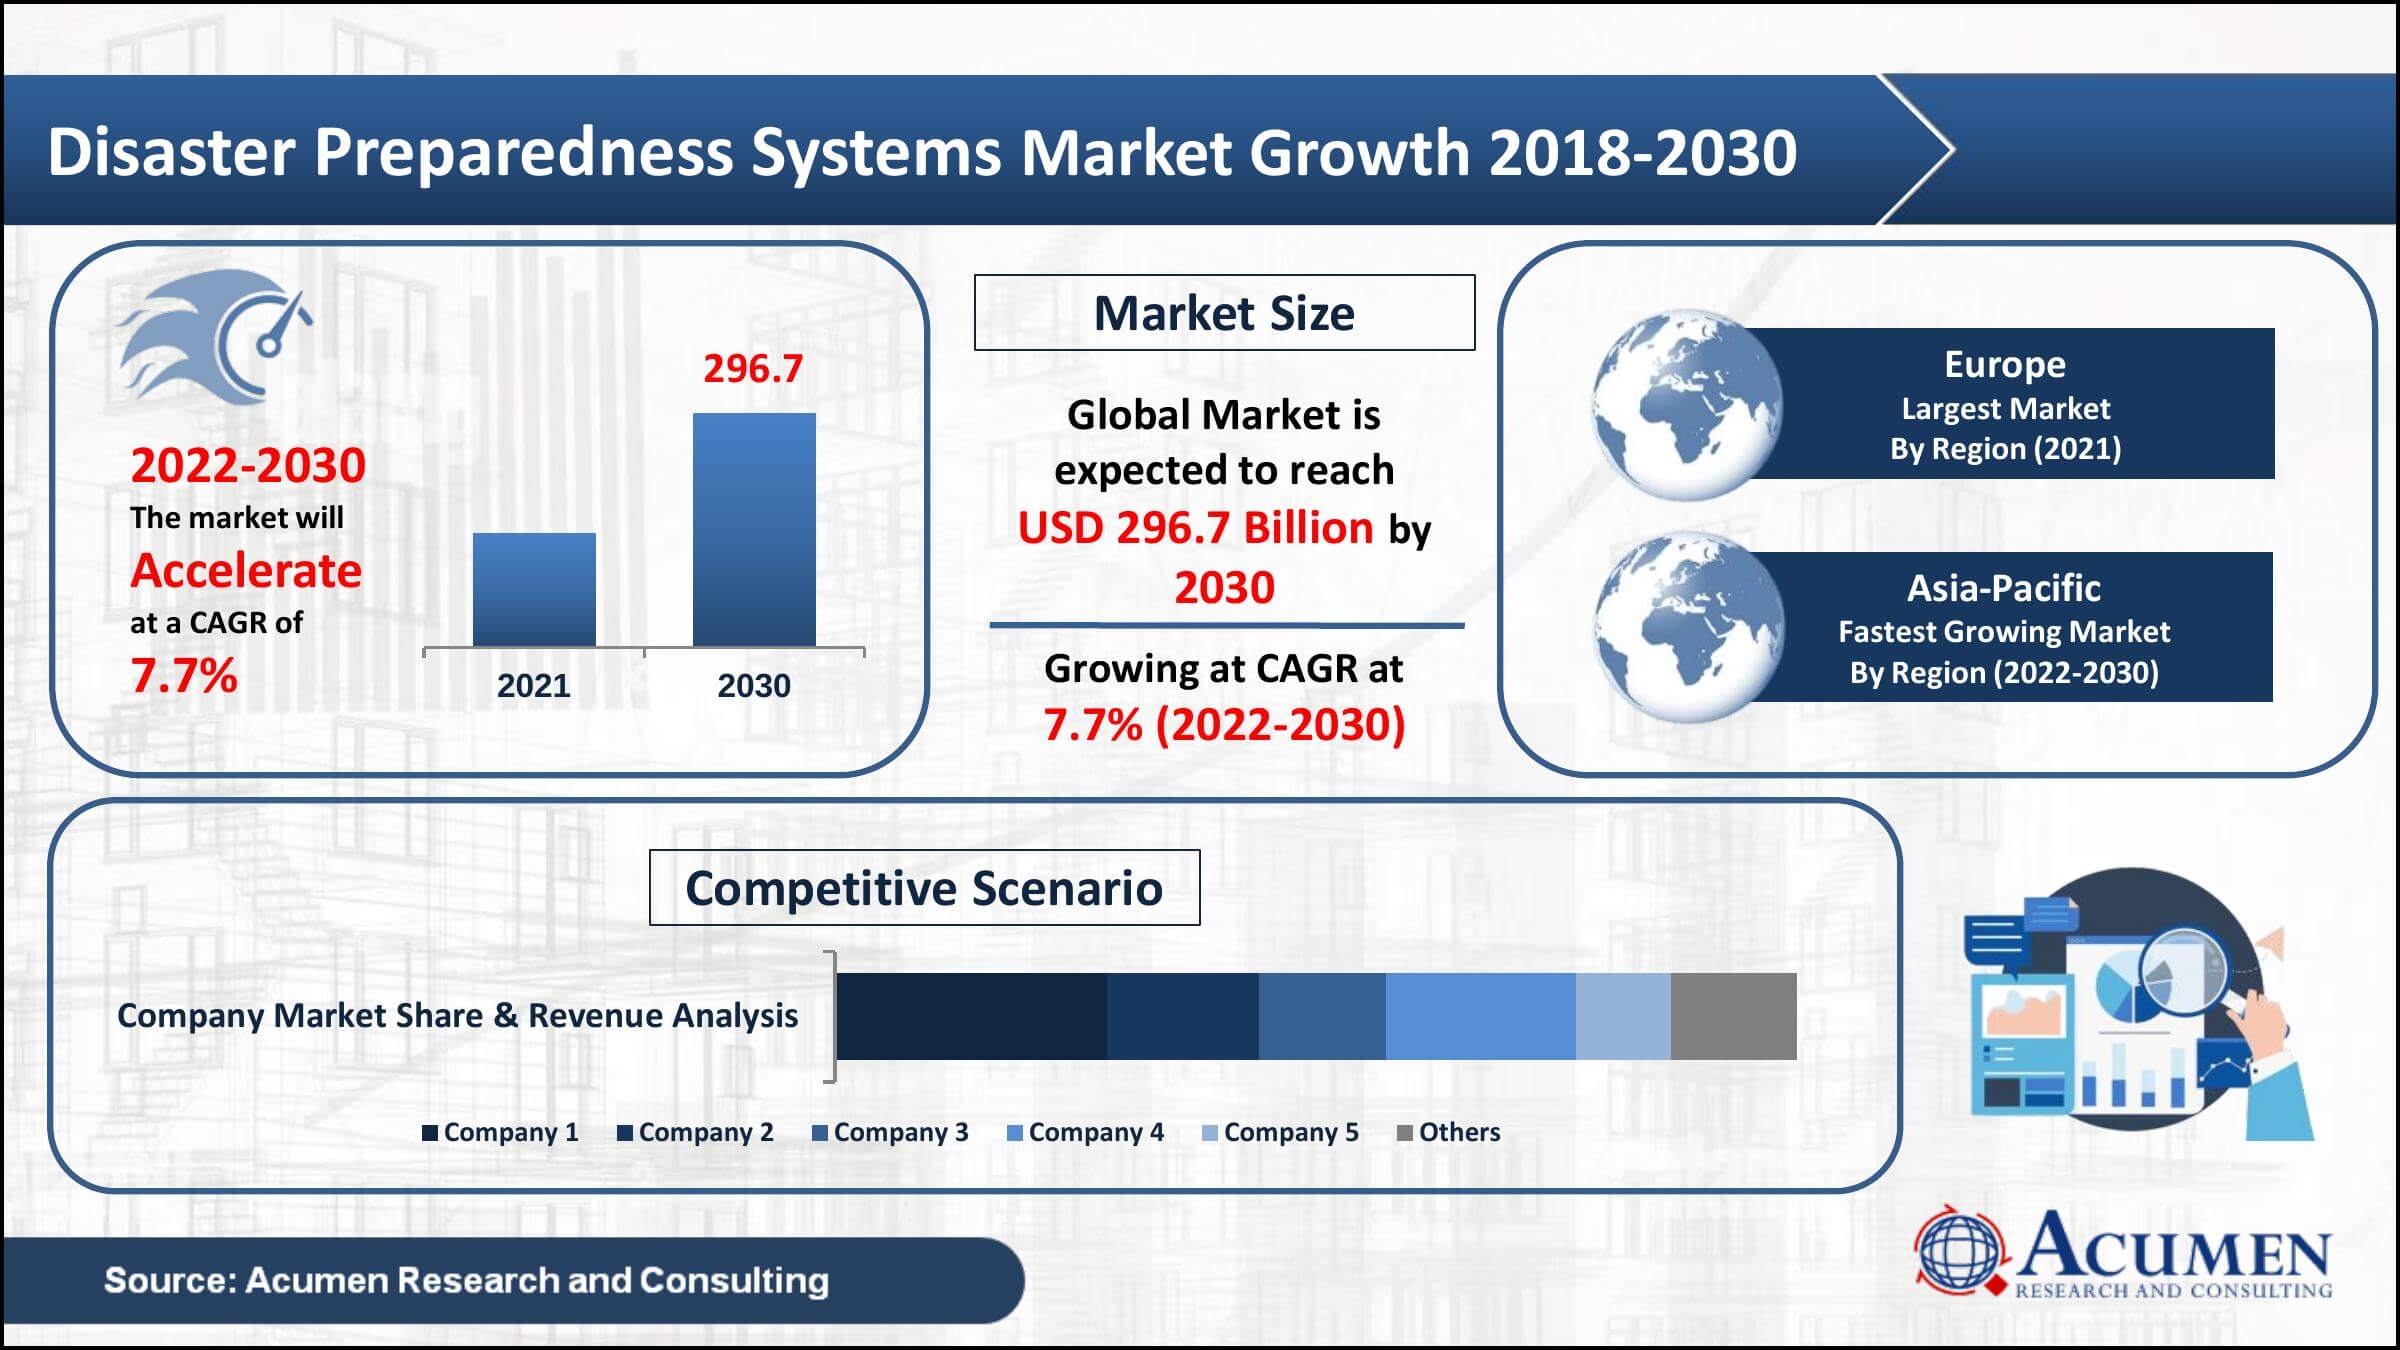 Global disaster preparedness systems market revenue collected USD 154.8 Billion in 2021, with a 7.7% CAGR between 2022 and 2030